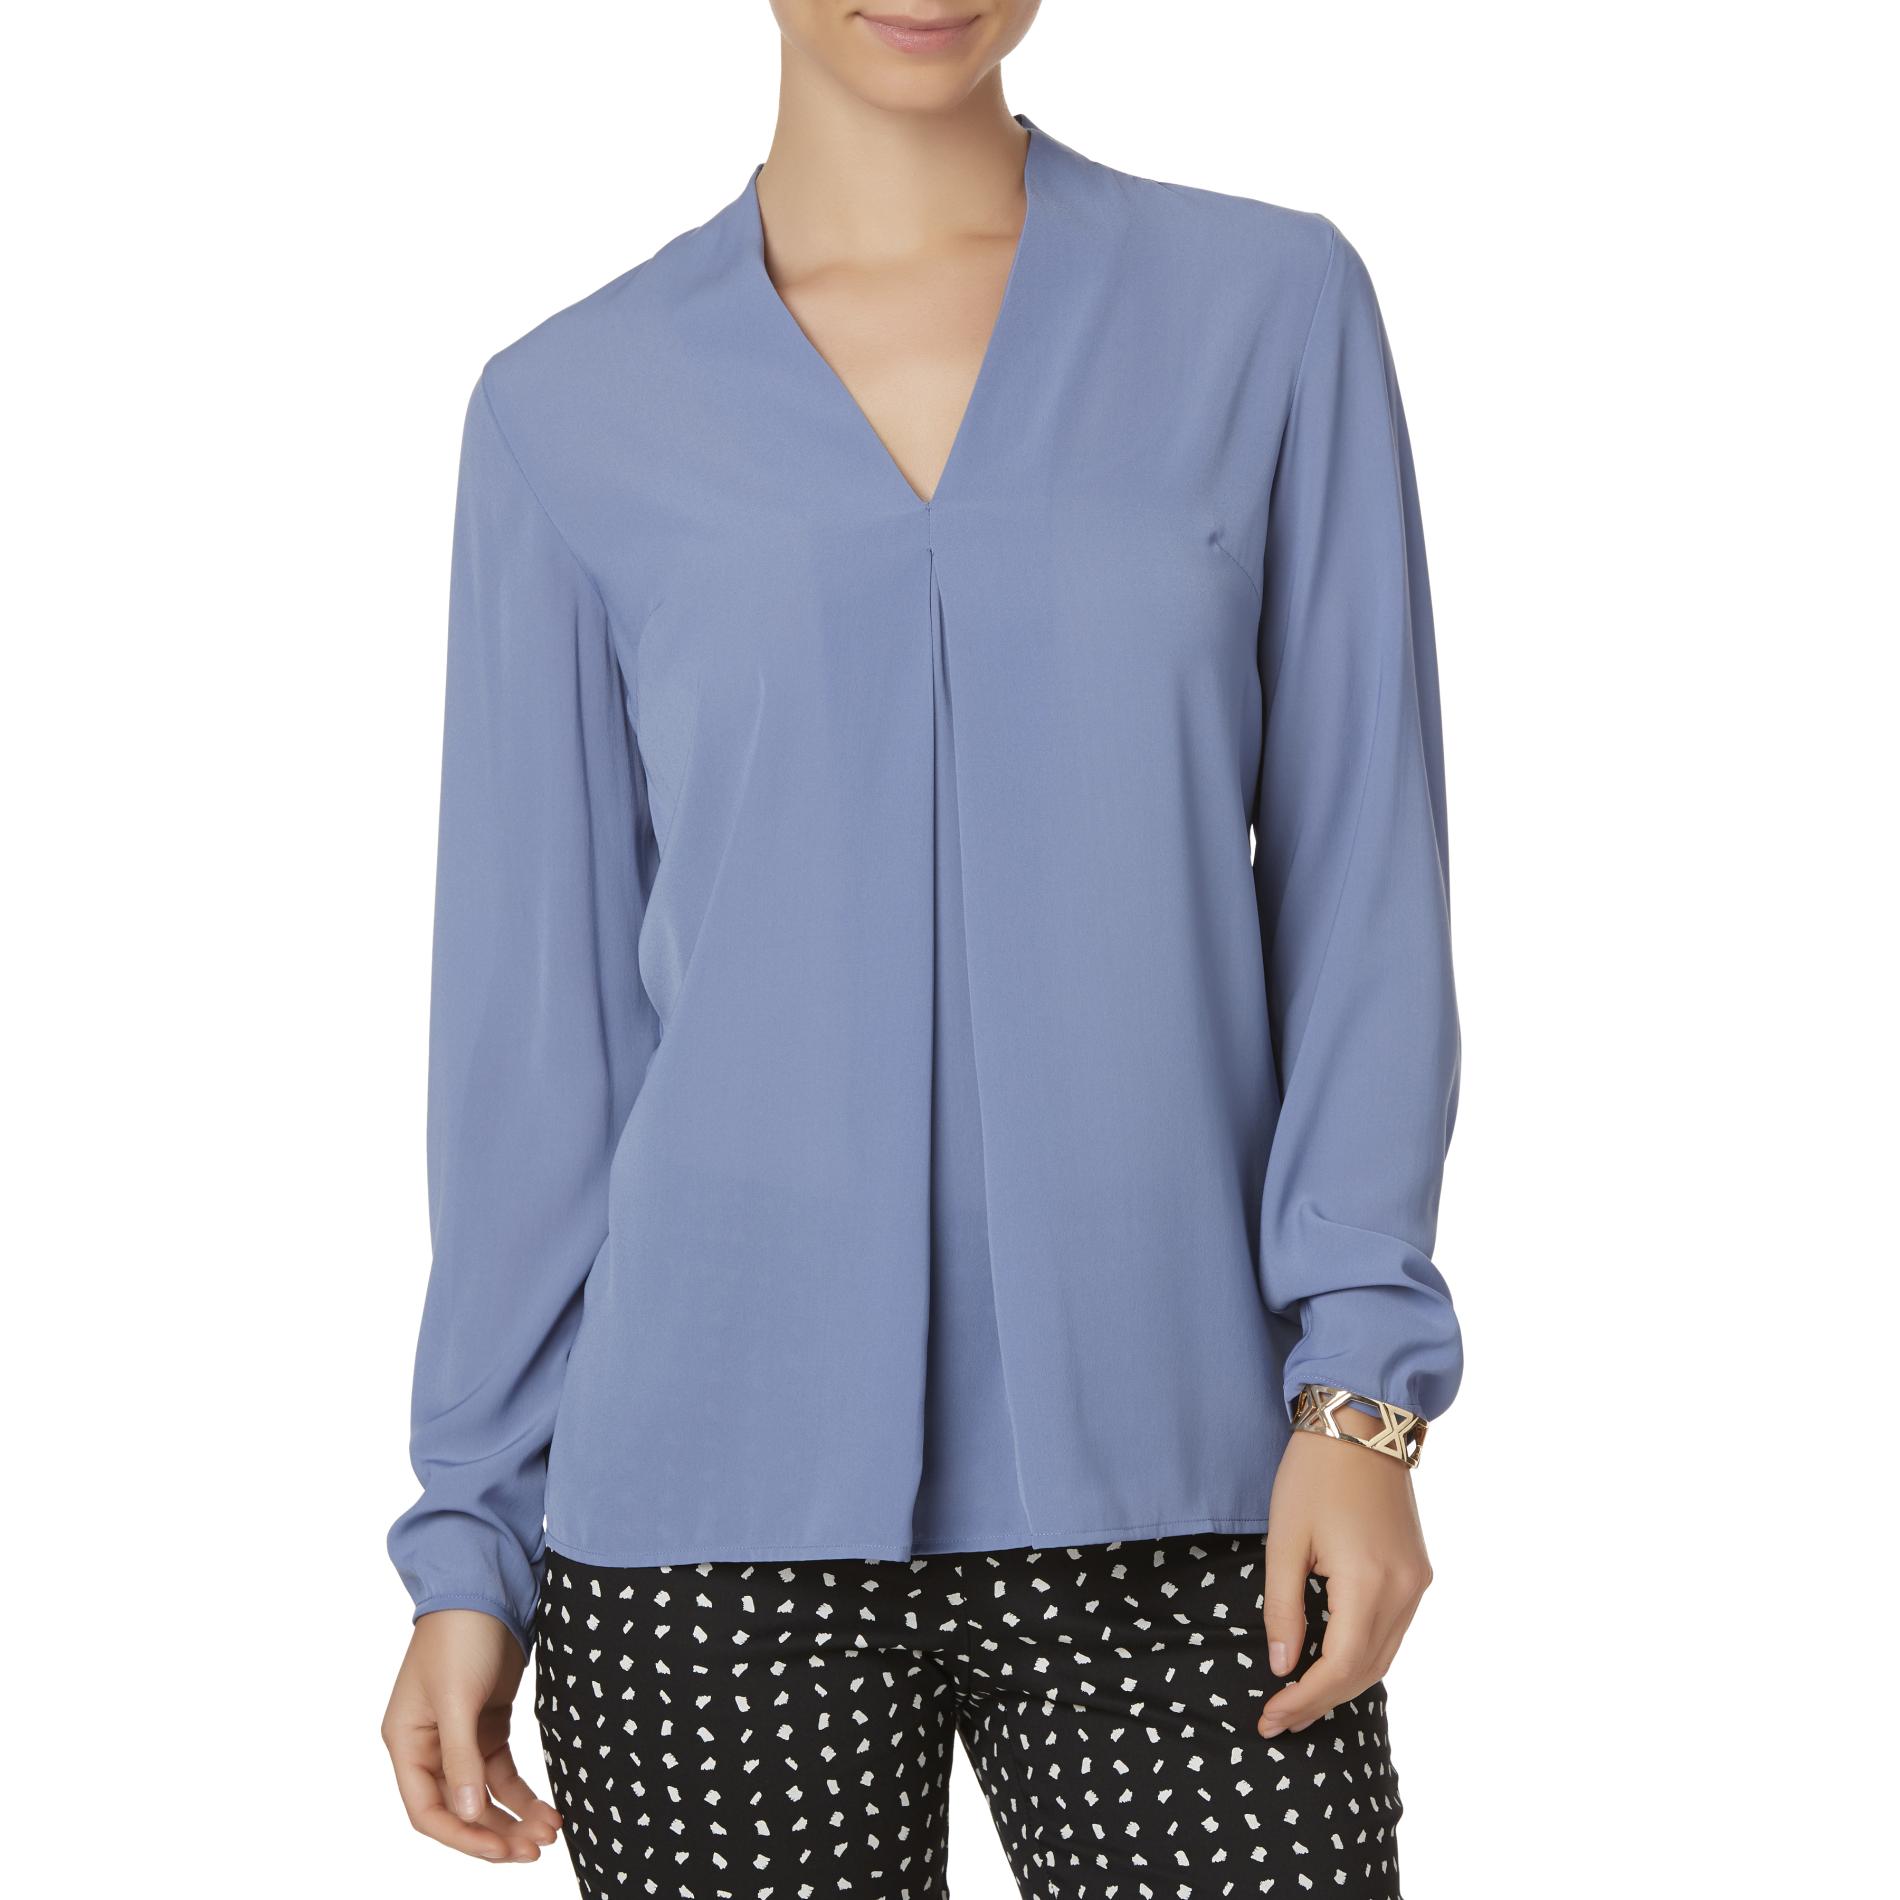 Women’s Shirts as chic basic parts